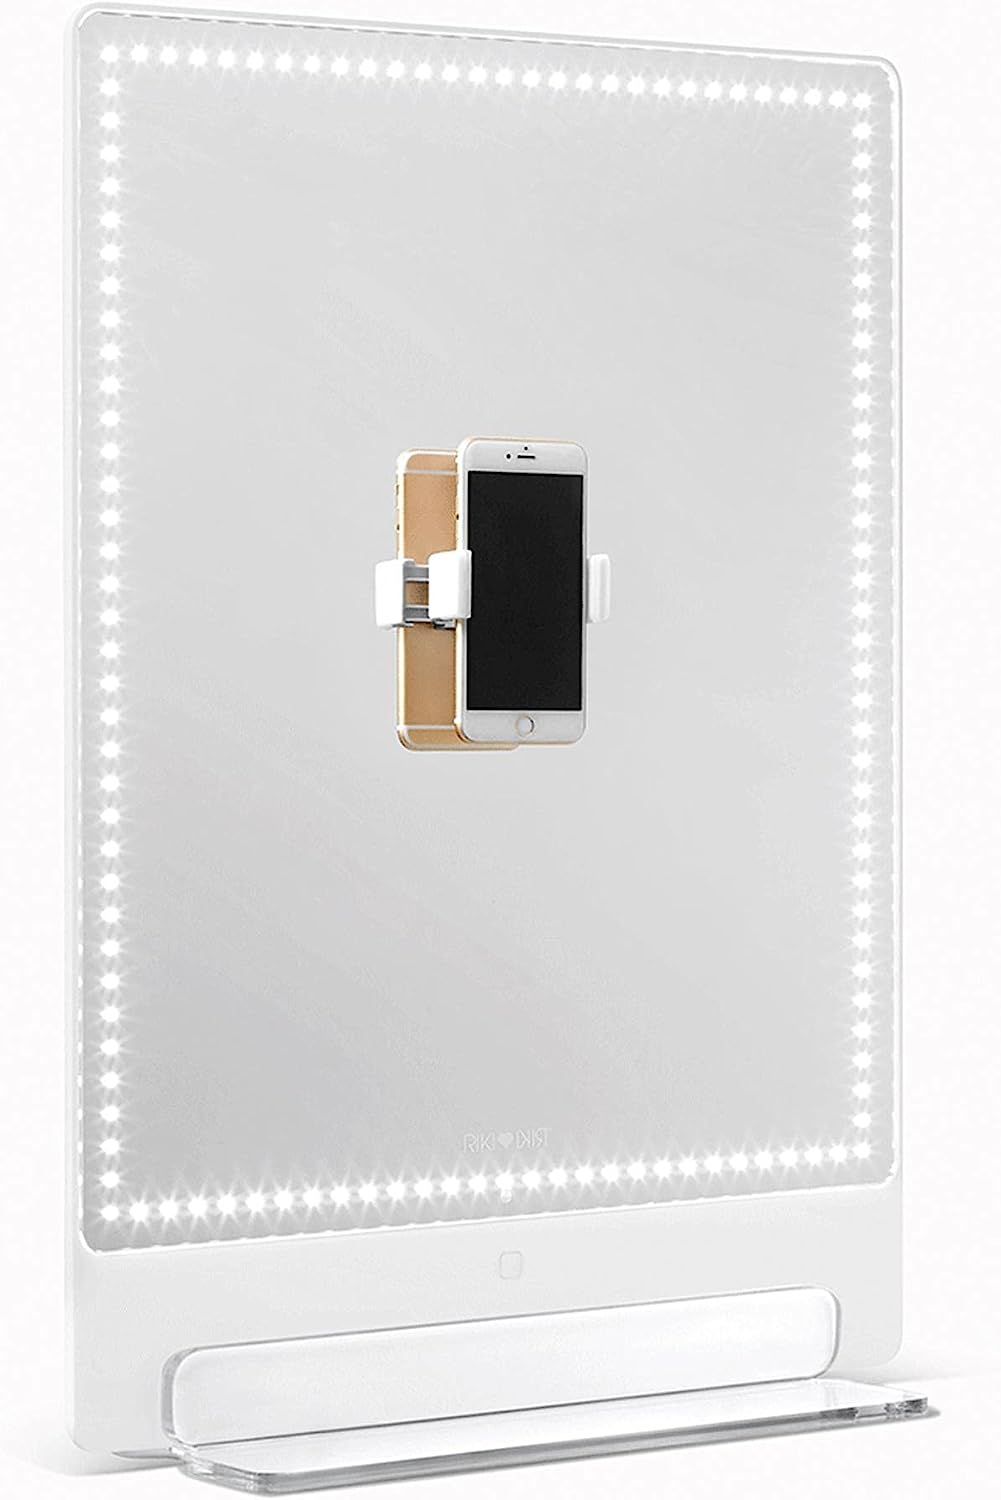 Riki Tall Vanity Mirror with HD LED Lights, Remote Lighting and Smartphone Control, Advanced High... | Amazon (US)